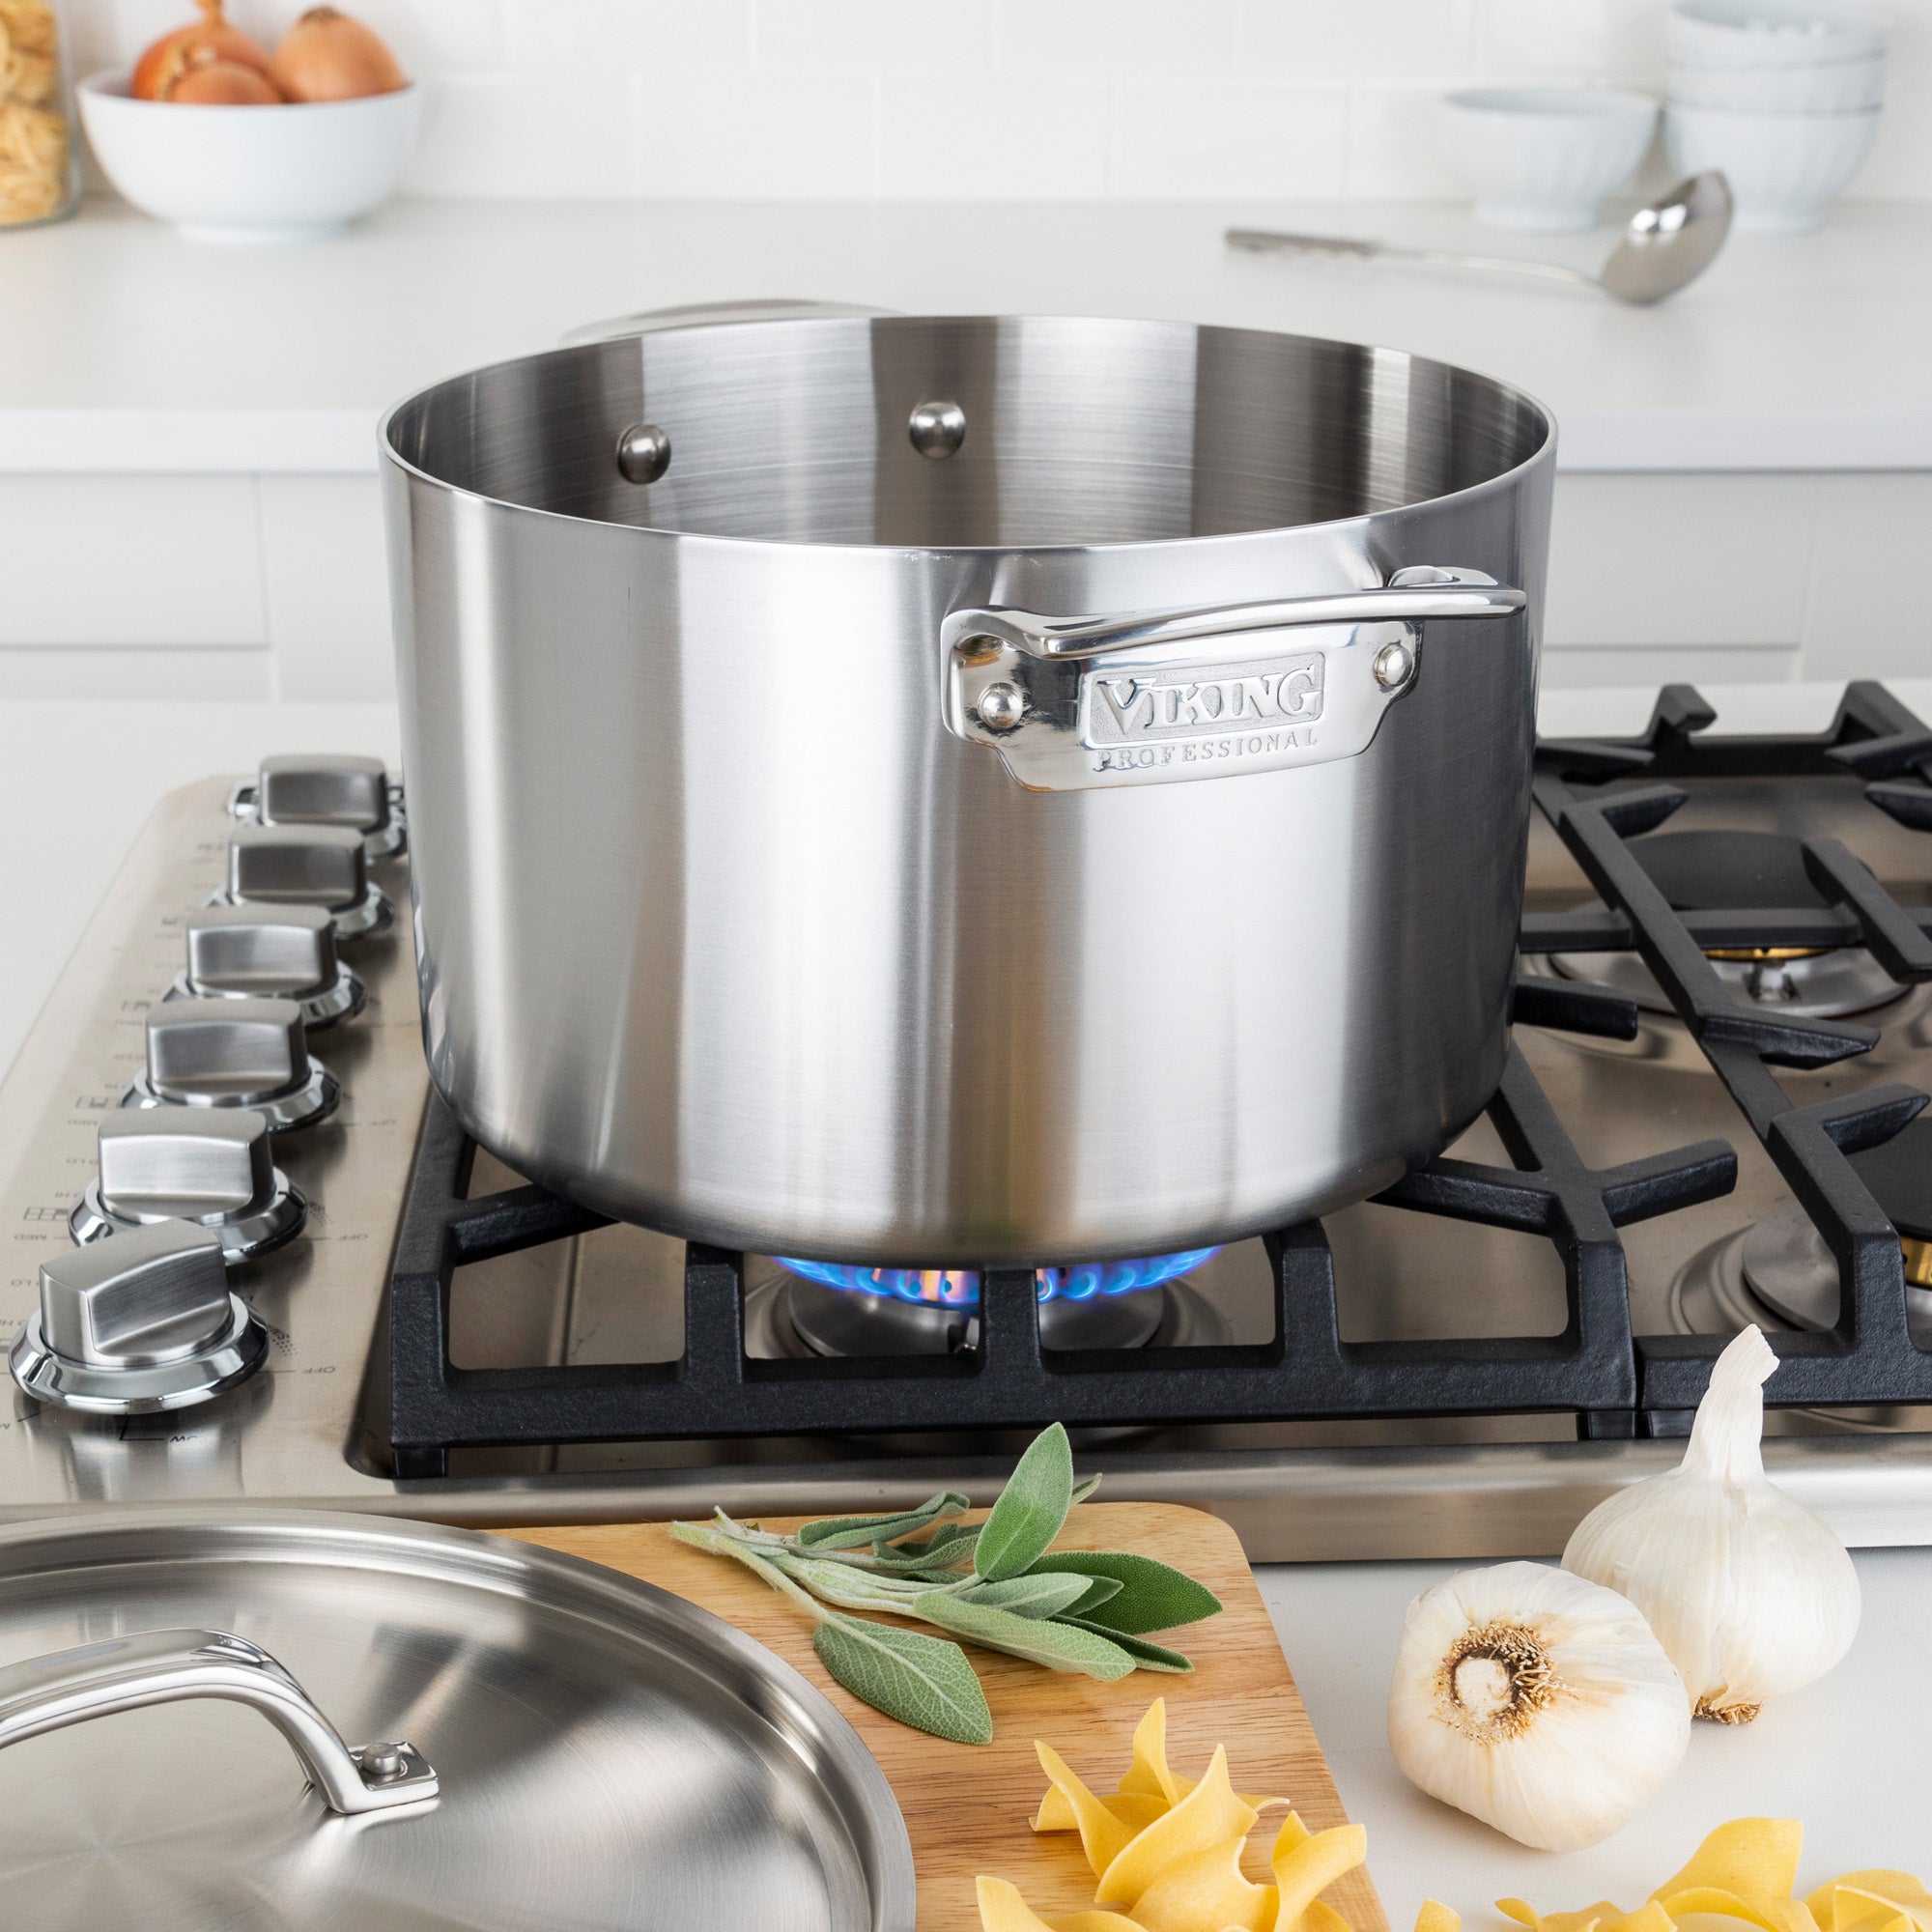 5 Ply Stock Pot 8QT, Stainless Steel